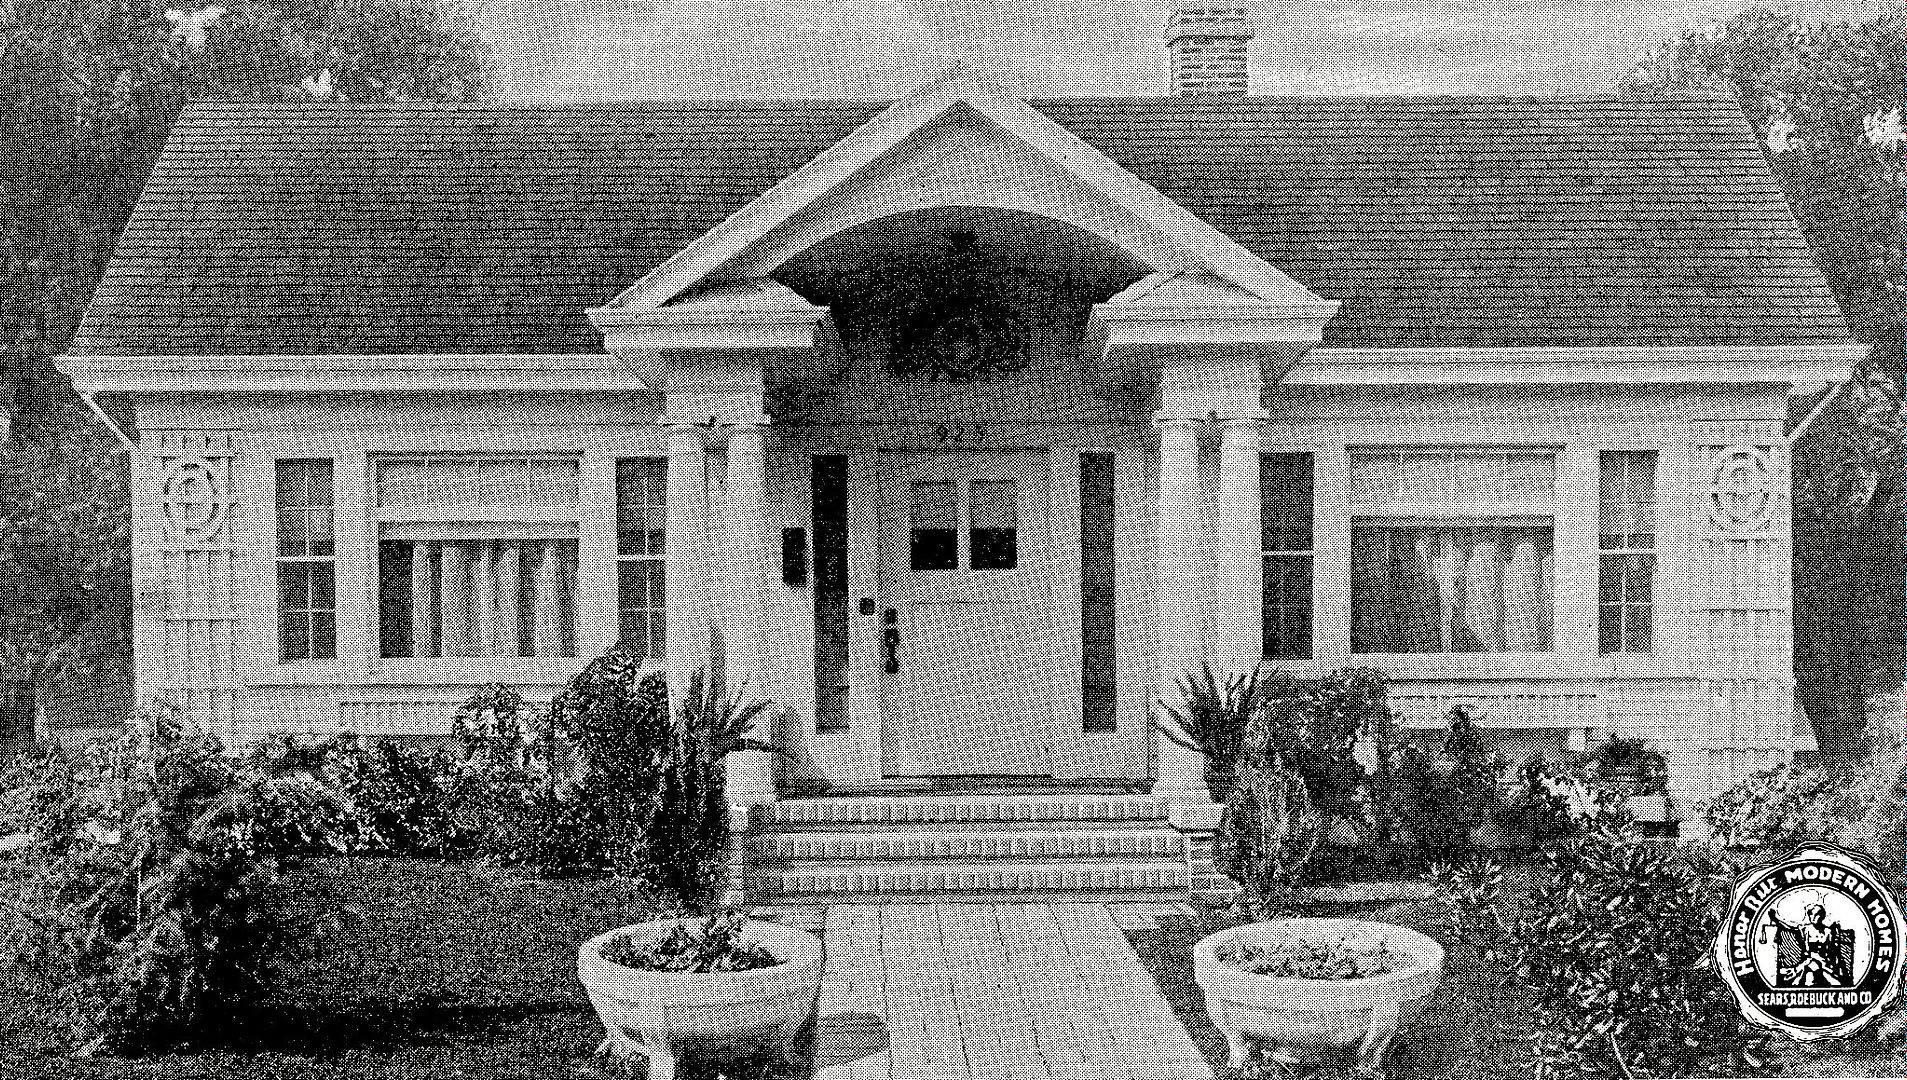 Sears Crescent from the 1921 Sears Modern Homes catalog. 